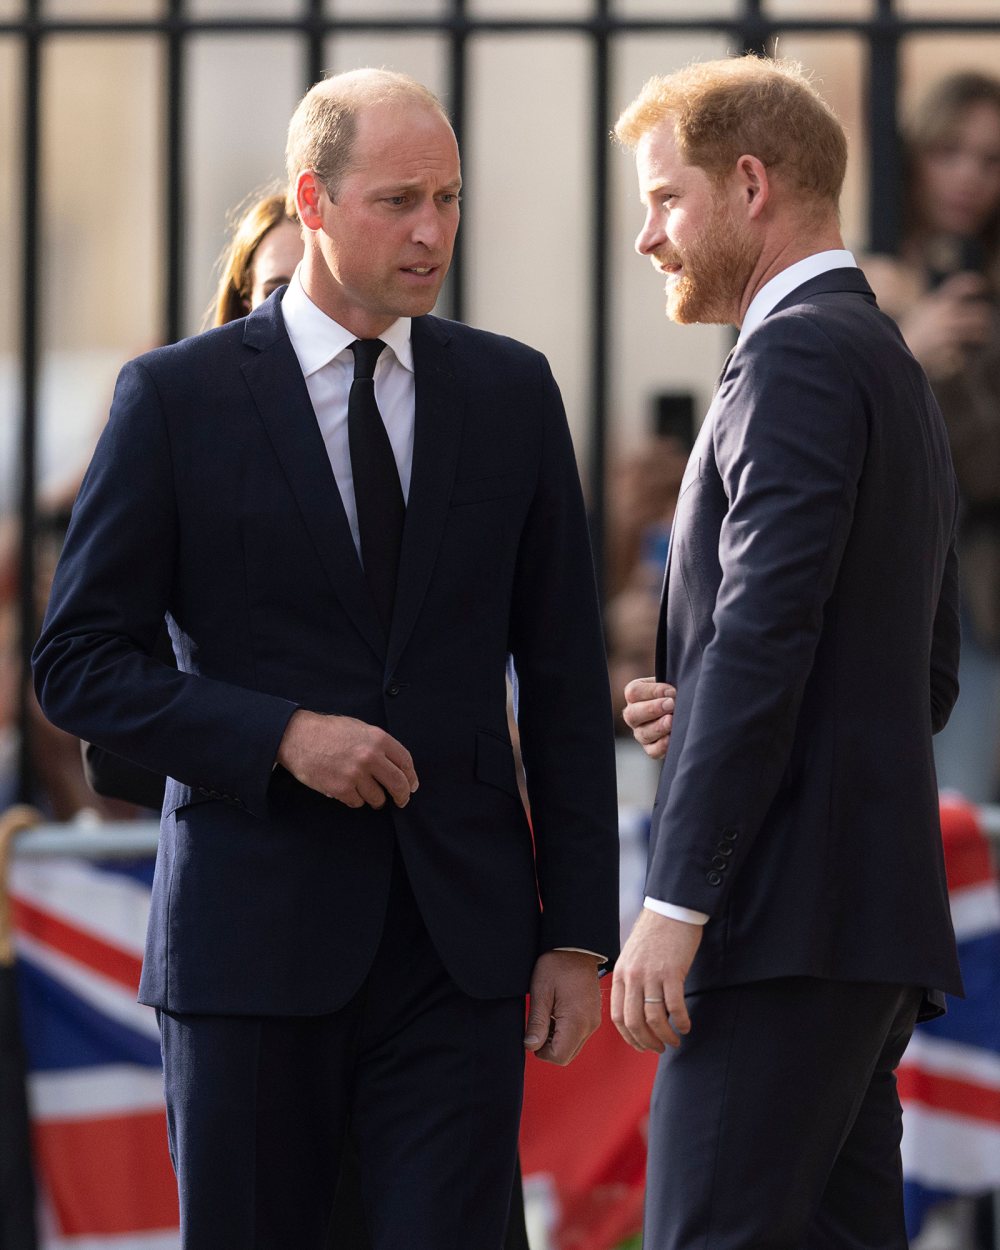 Prince William and Prince Harry's 'Rift Hasn't Been Resolved': William 'Can't Quite Forgive Harry'